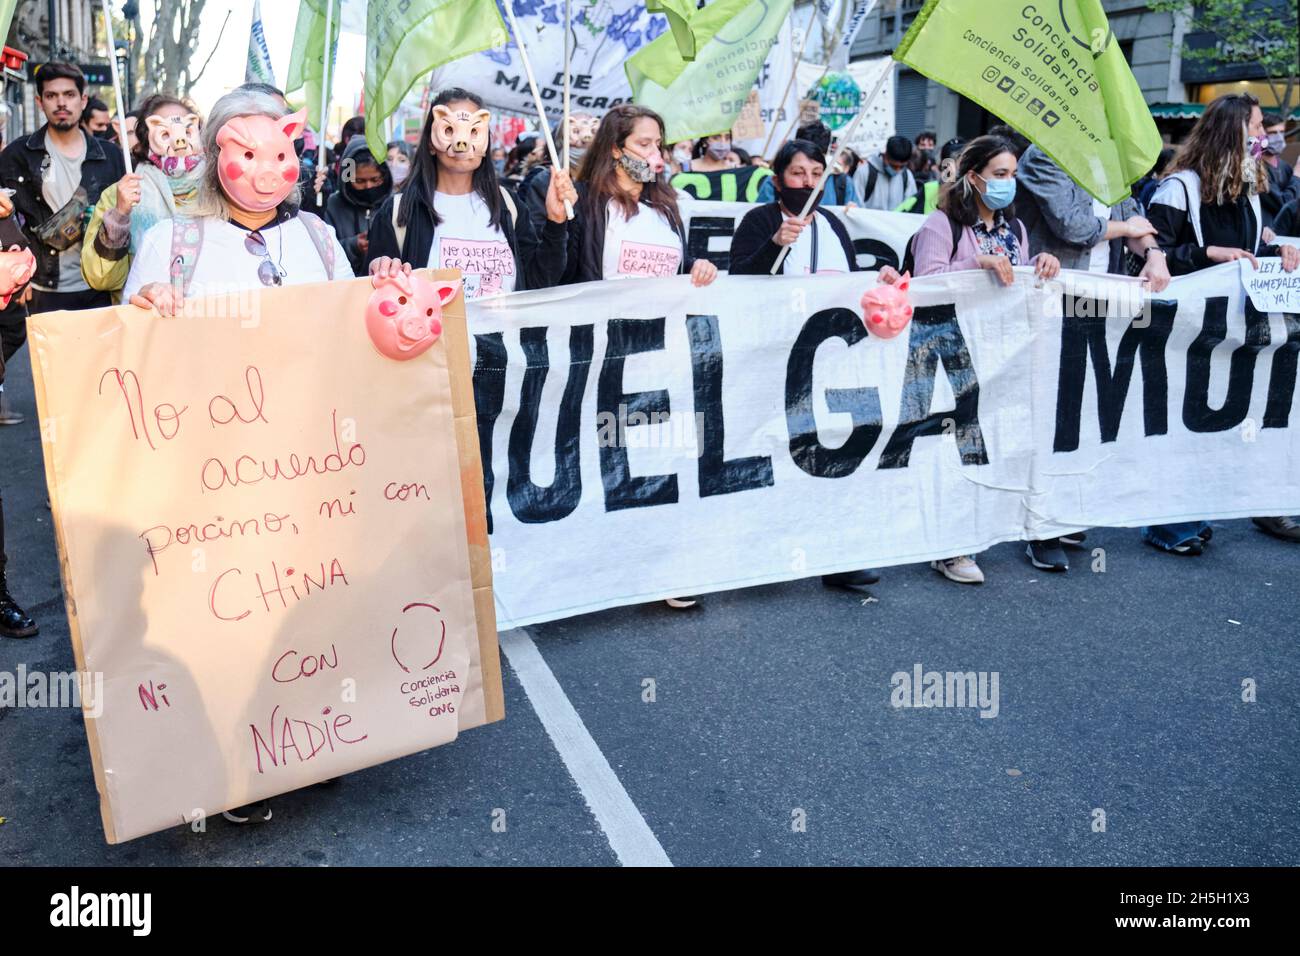 Buenos Aires, Argentina; Sept 24, 2021: Environmental activism, people marching during the Global Climate Strike. A woman in a pig mask holds a sign: Stock Photo